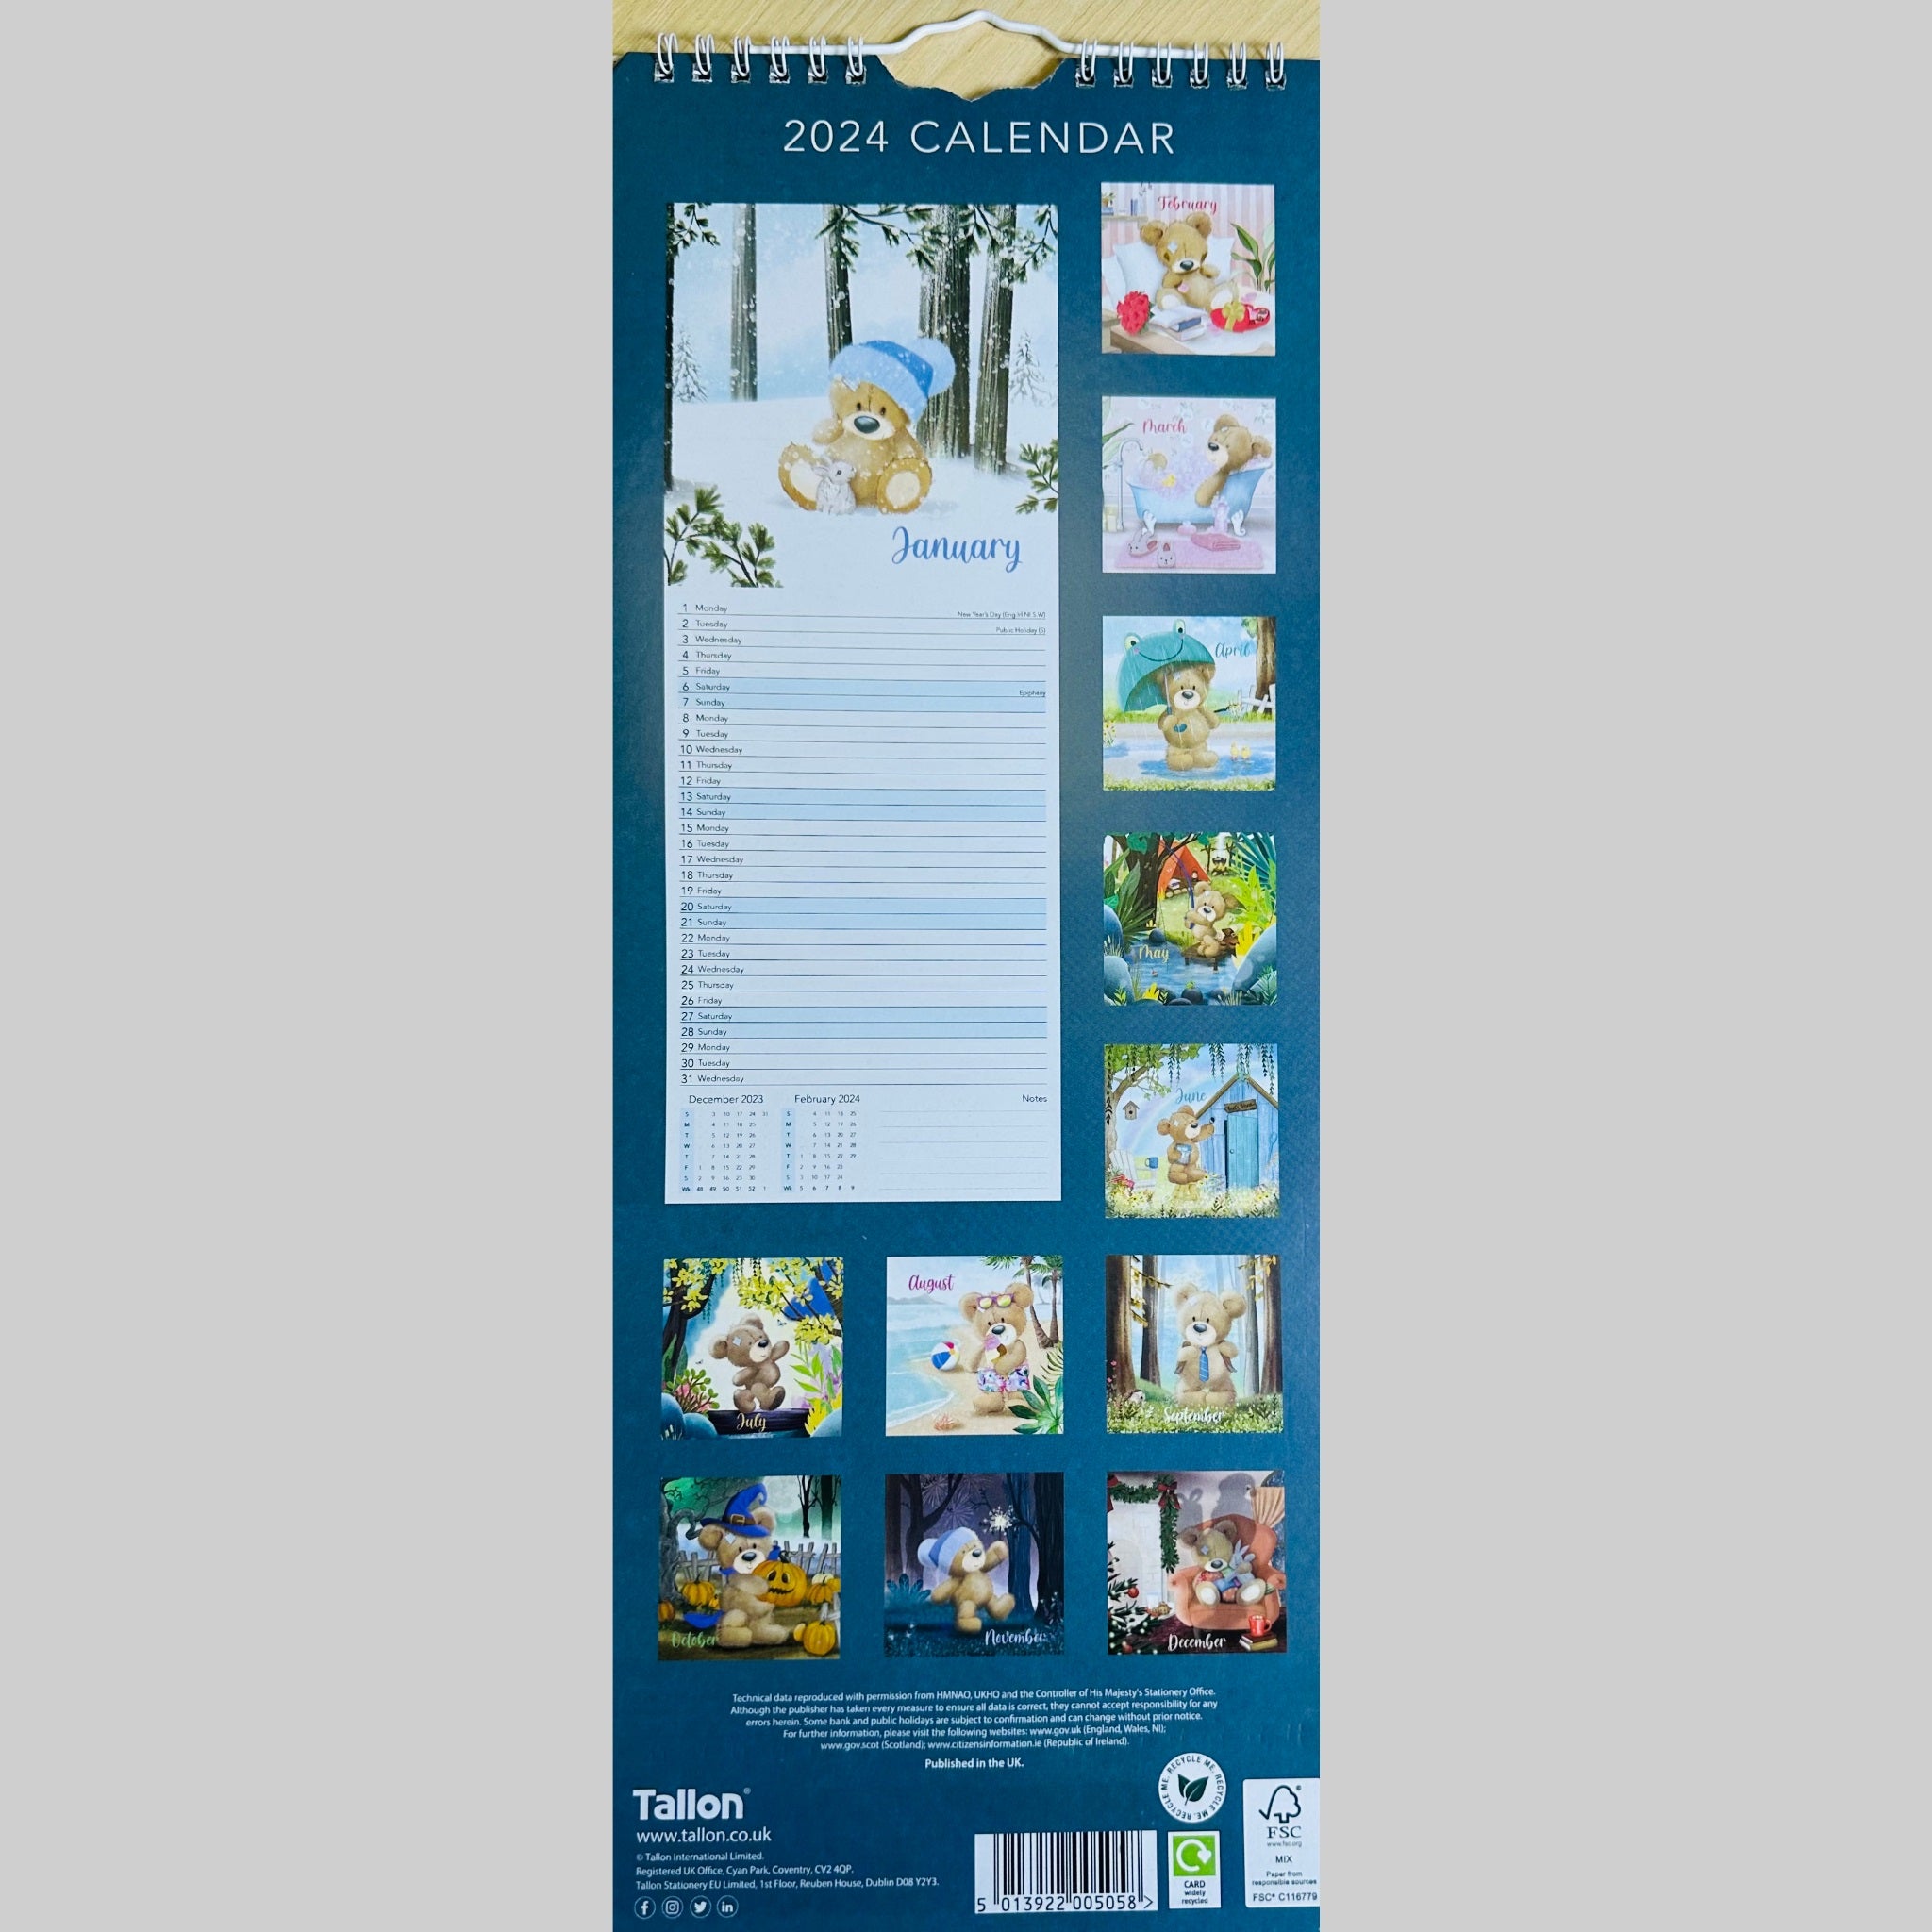 Beclen Harp Super Slim Month to View Spiral Bound Hanging Wall Calendar Home Office 2024 Enjoy The Little Things, You've Got This, Teddies, Jungle Vibes